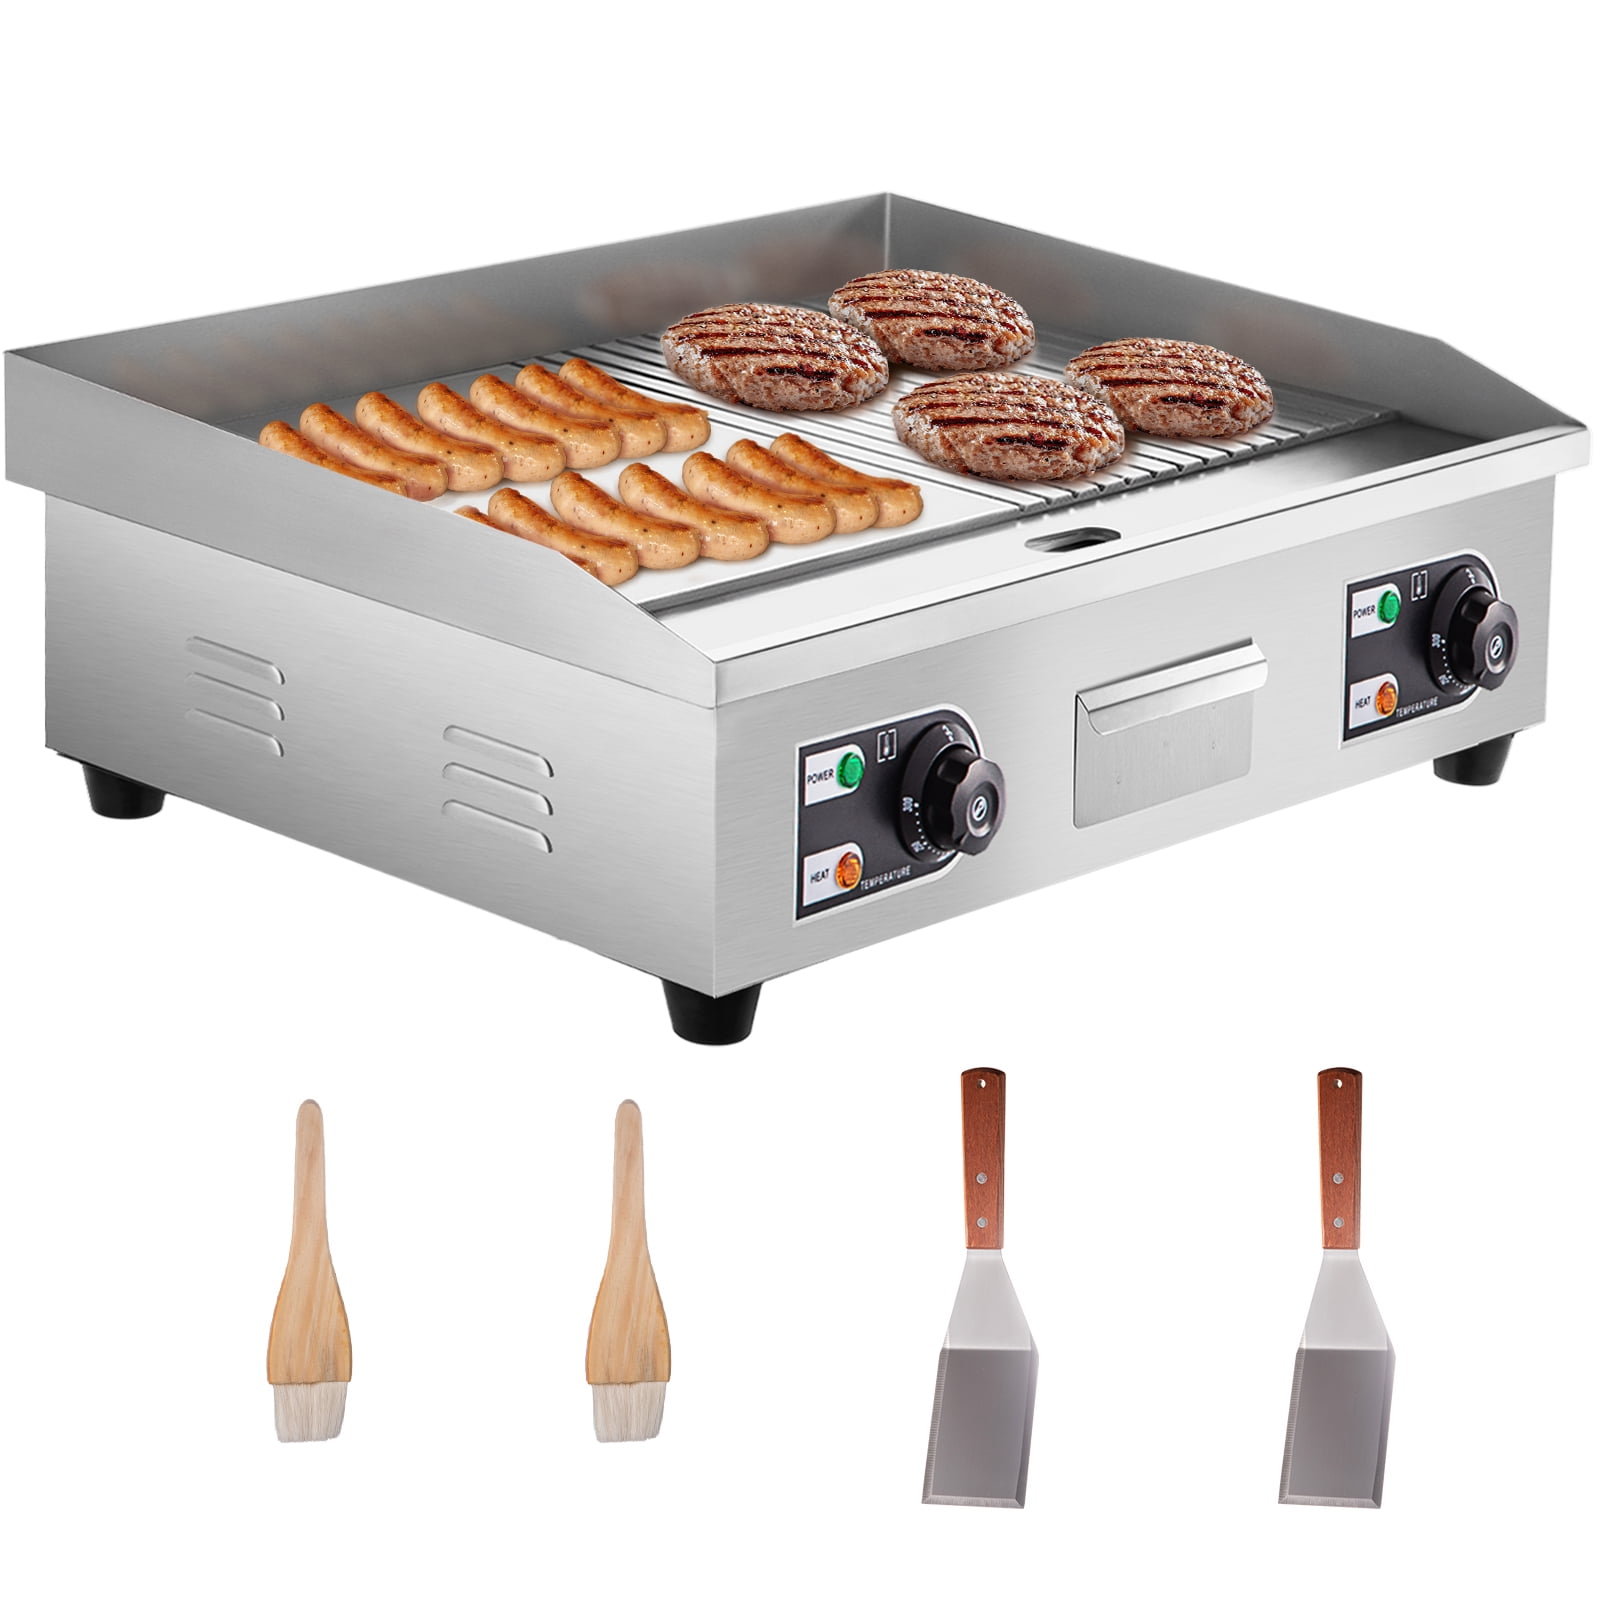 Commercial Countertop Griddles & Flat Top Grills